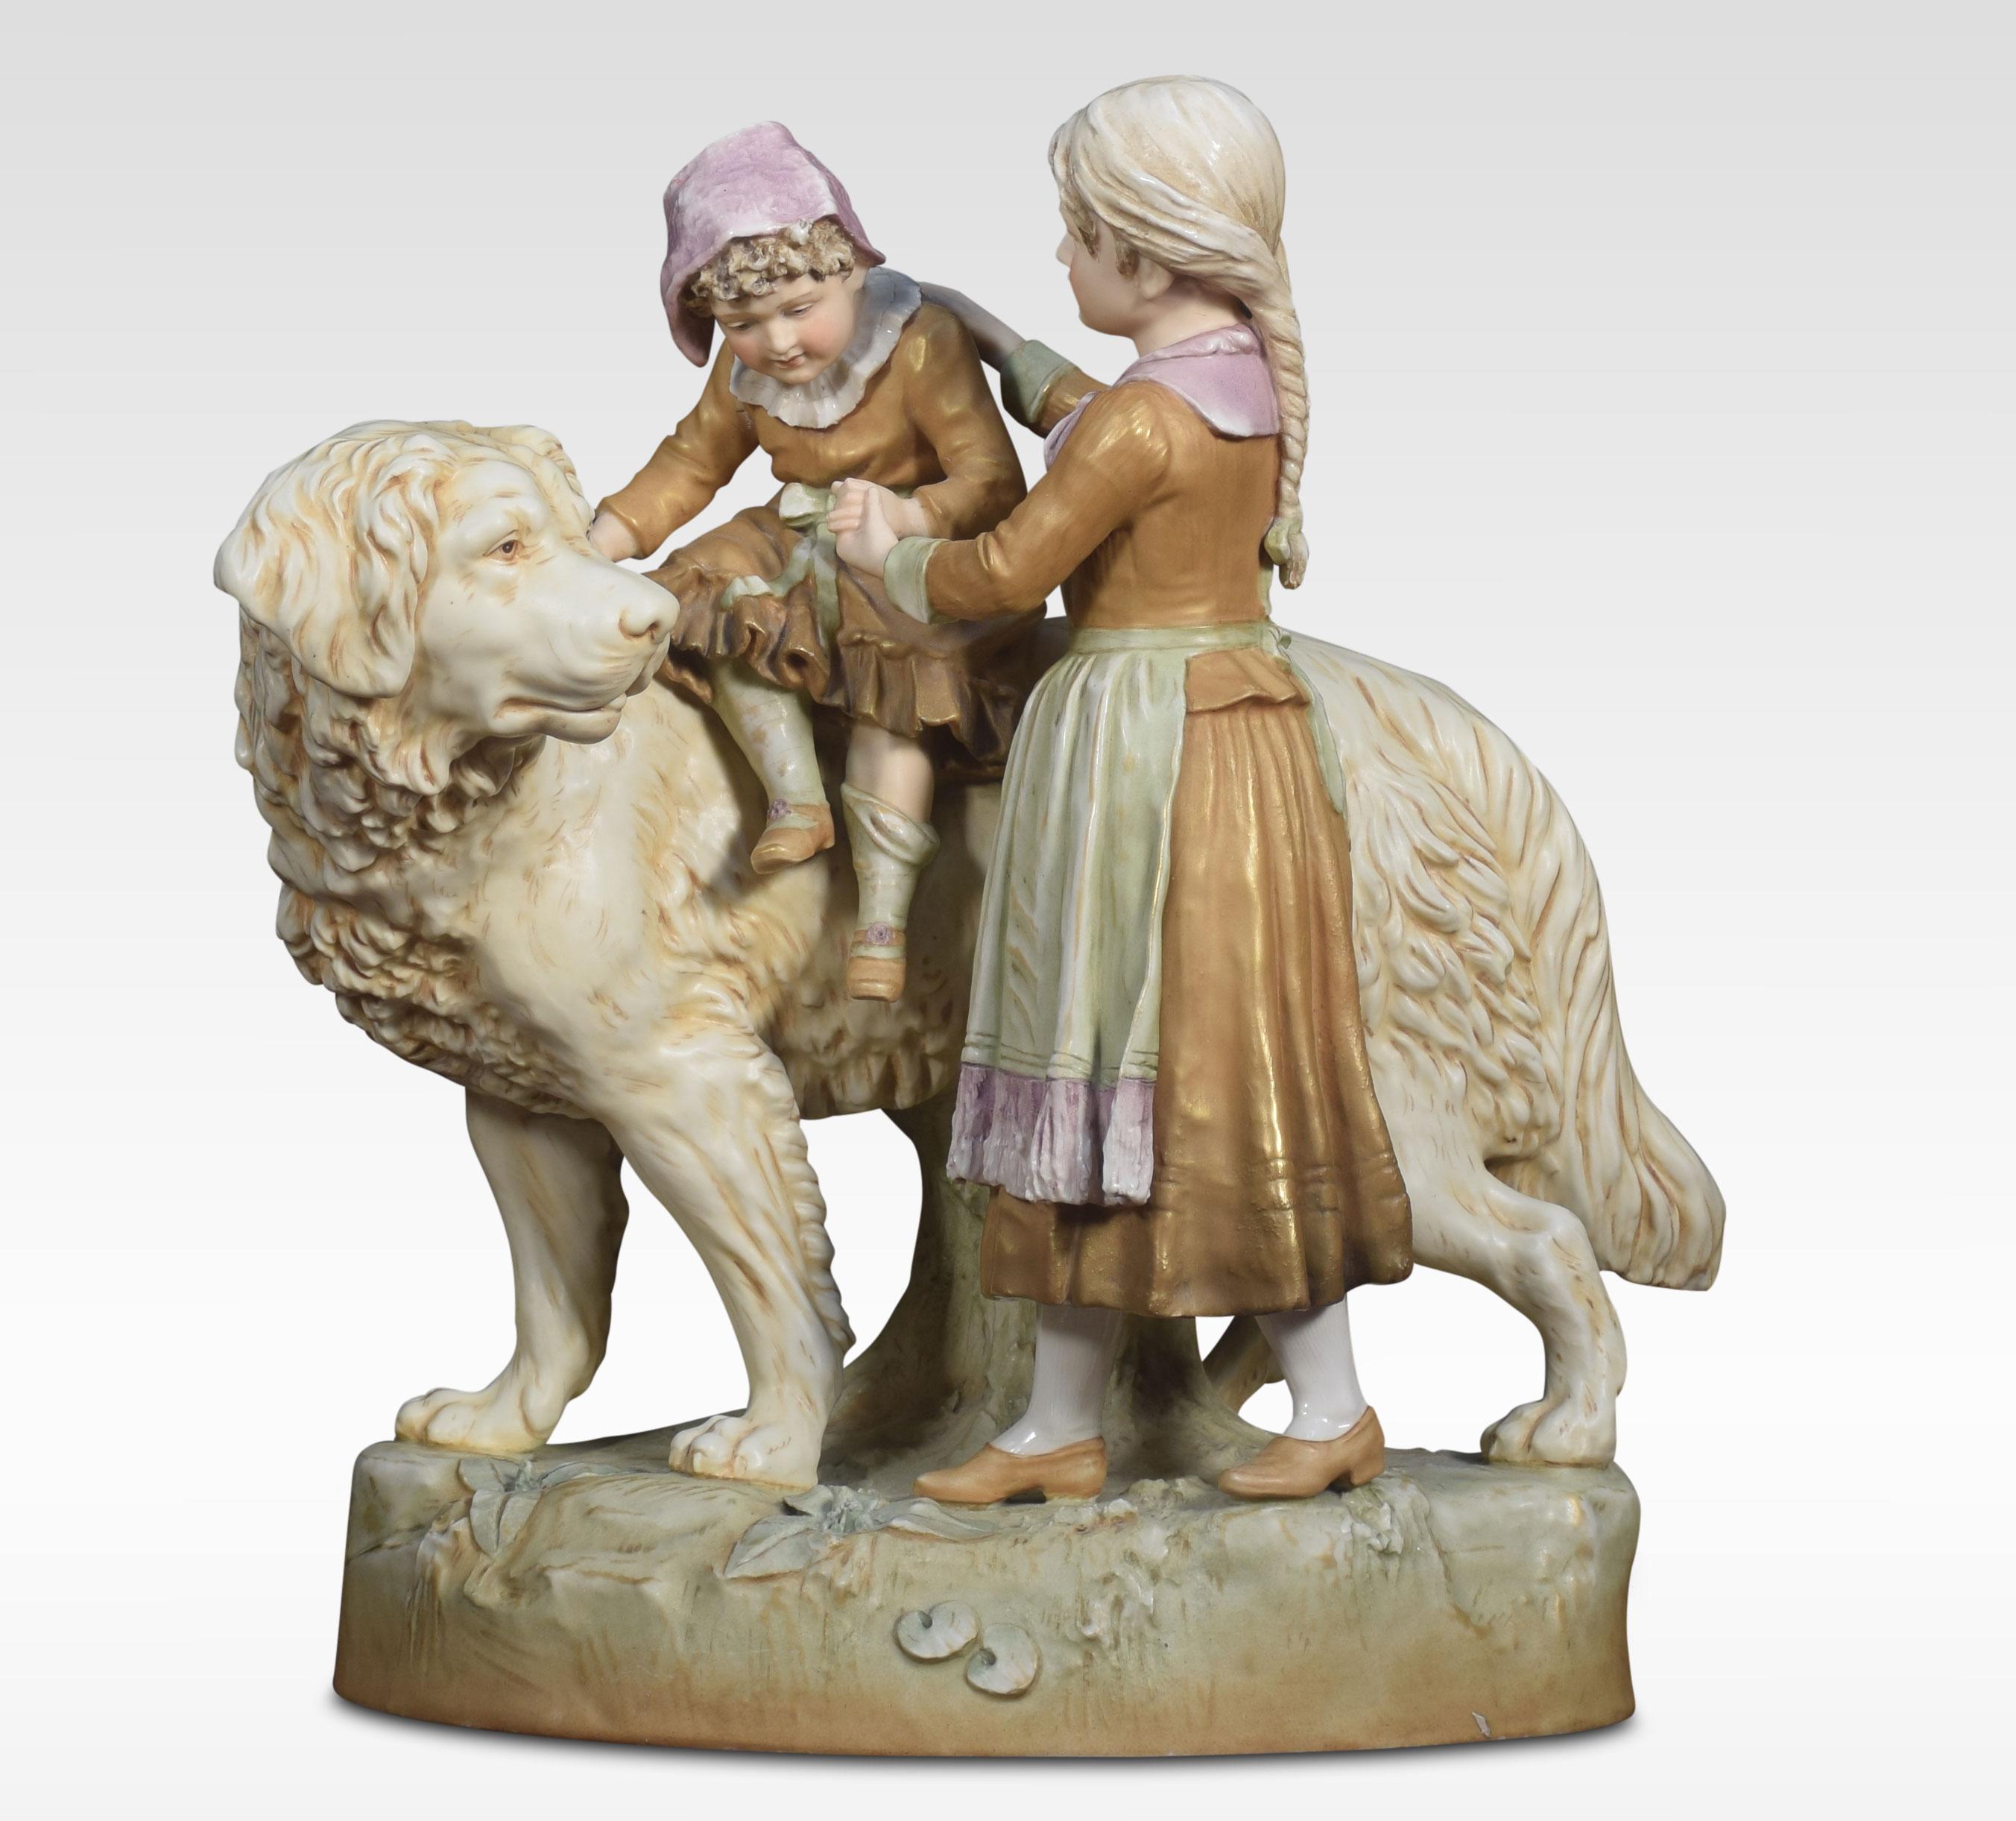 Very large Royal Dux porcelain figure group, of a dog, mother, and child realistically modelled and coloured in ivory and soft shades of green and pink on an oval earthy ground. Impressed and printed marks and numbers underside together with the